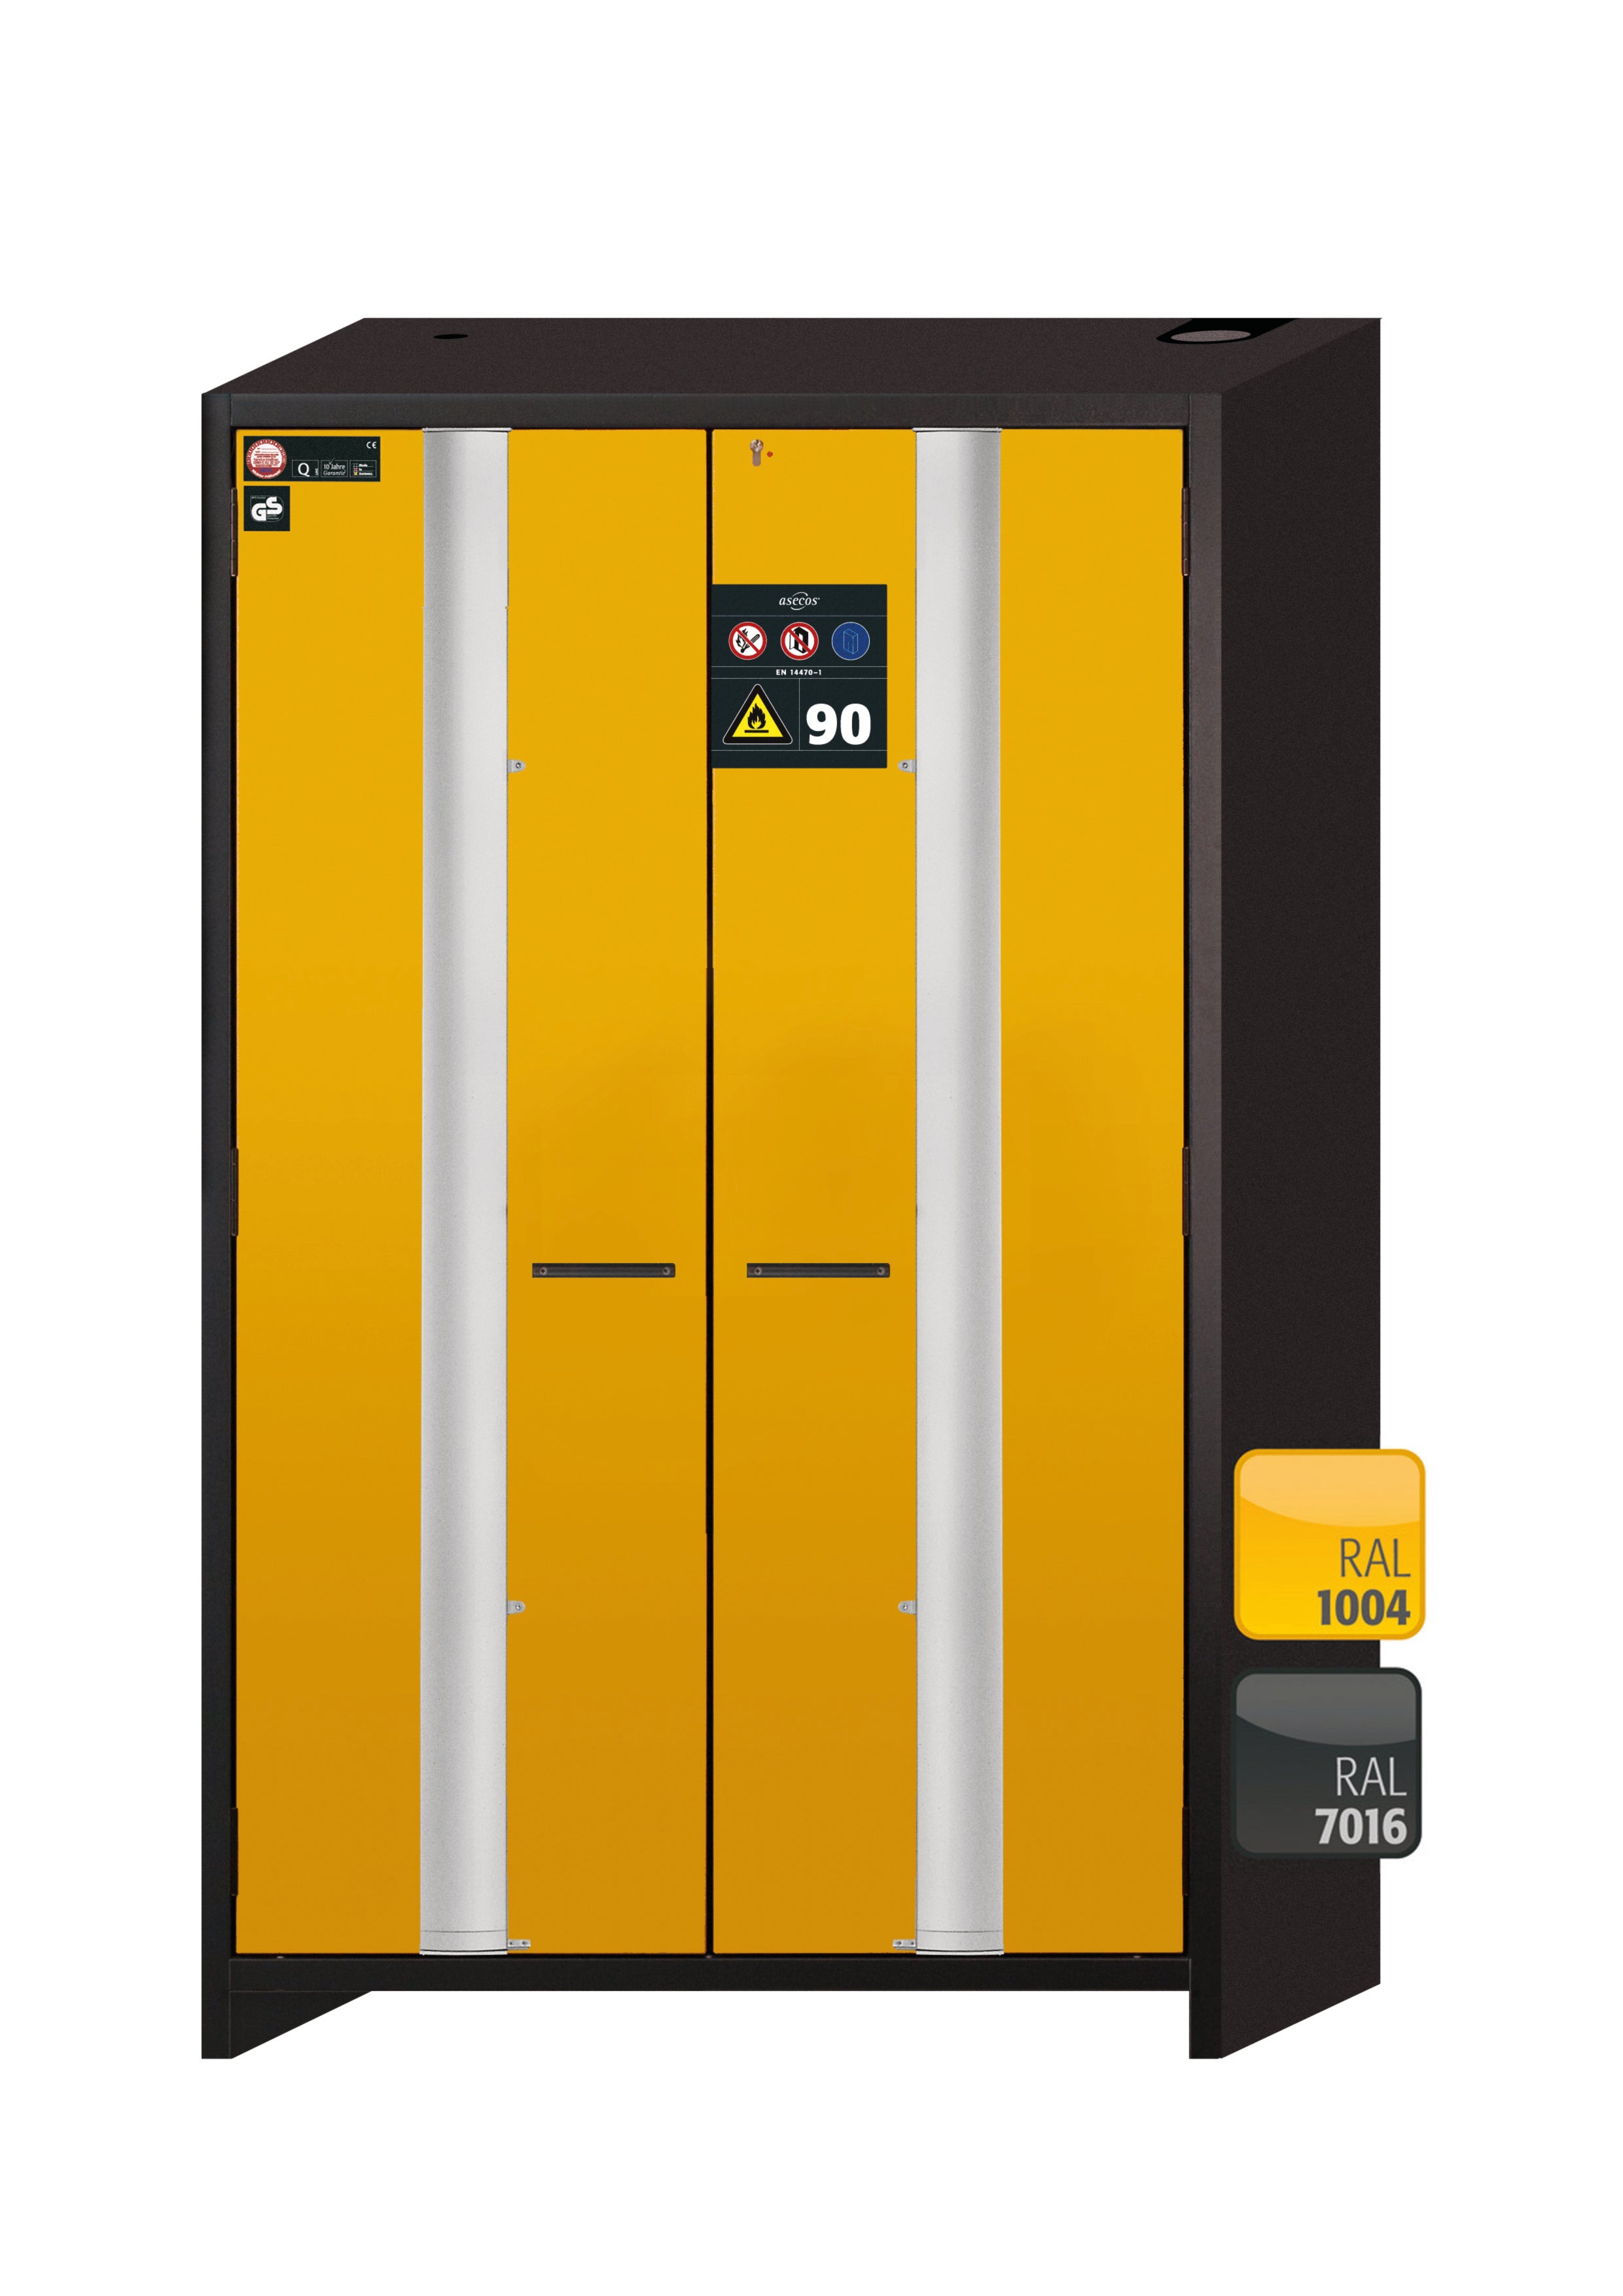 Type 90 safety cabinet Q-PHOENIX-90 model Q90.195.120.FD in safety yellow RAL 1004 with 2x standard pull-out tray (sheet steel)